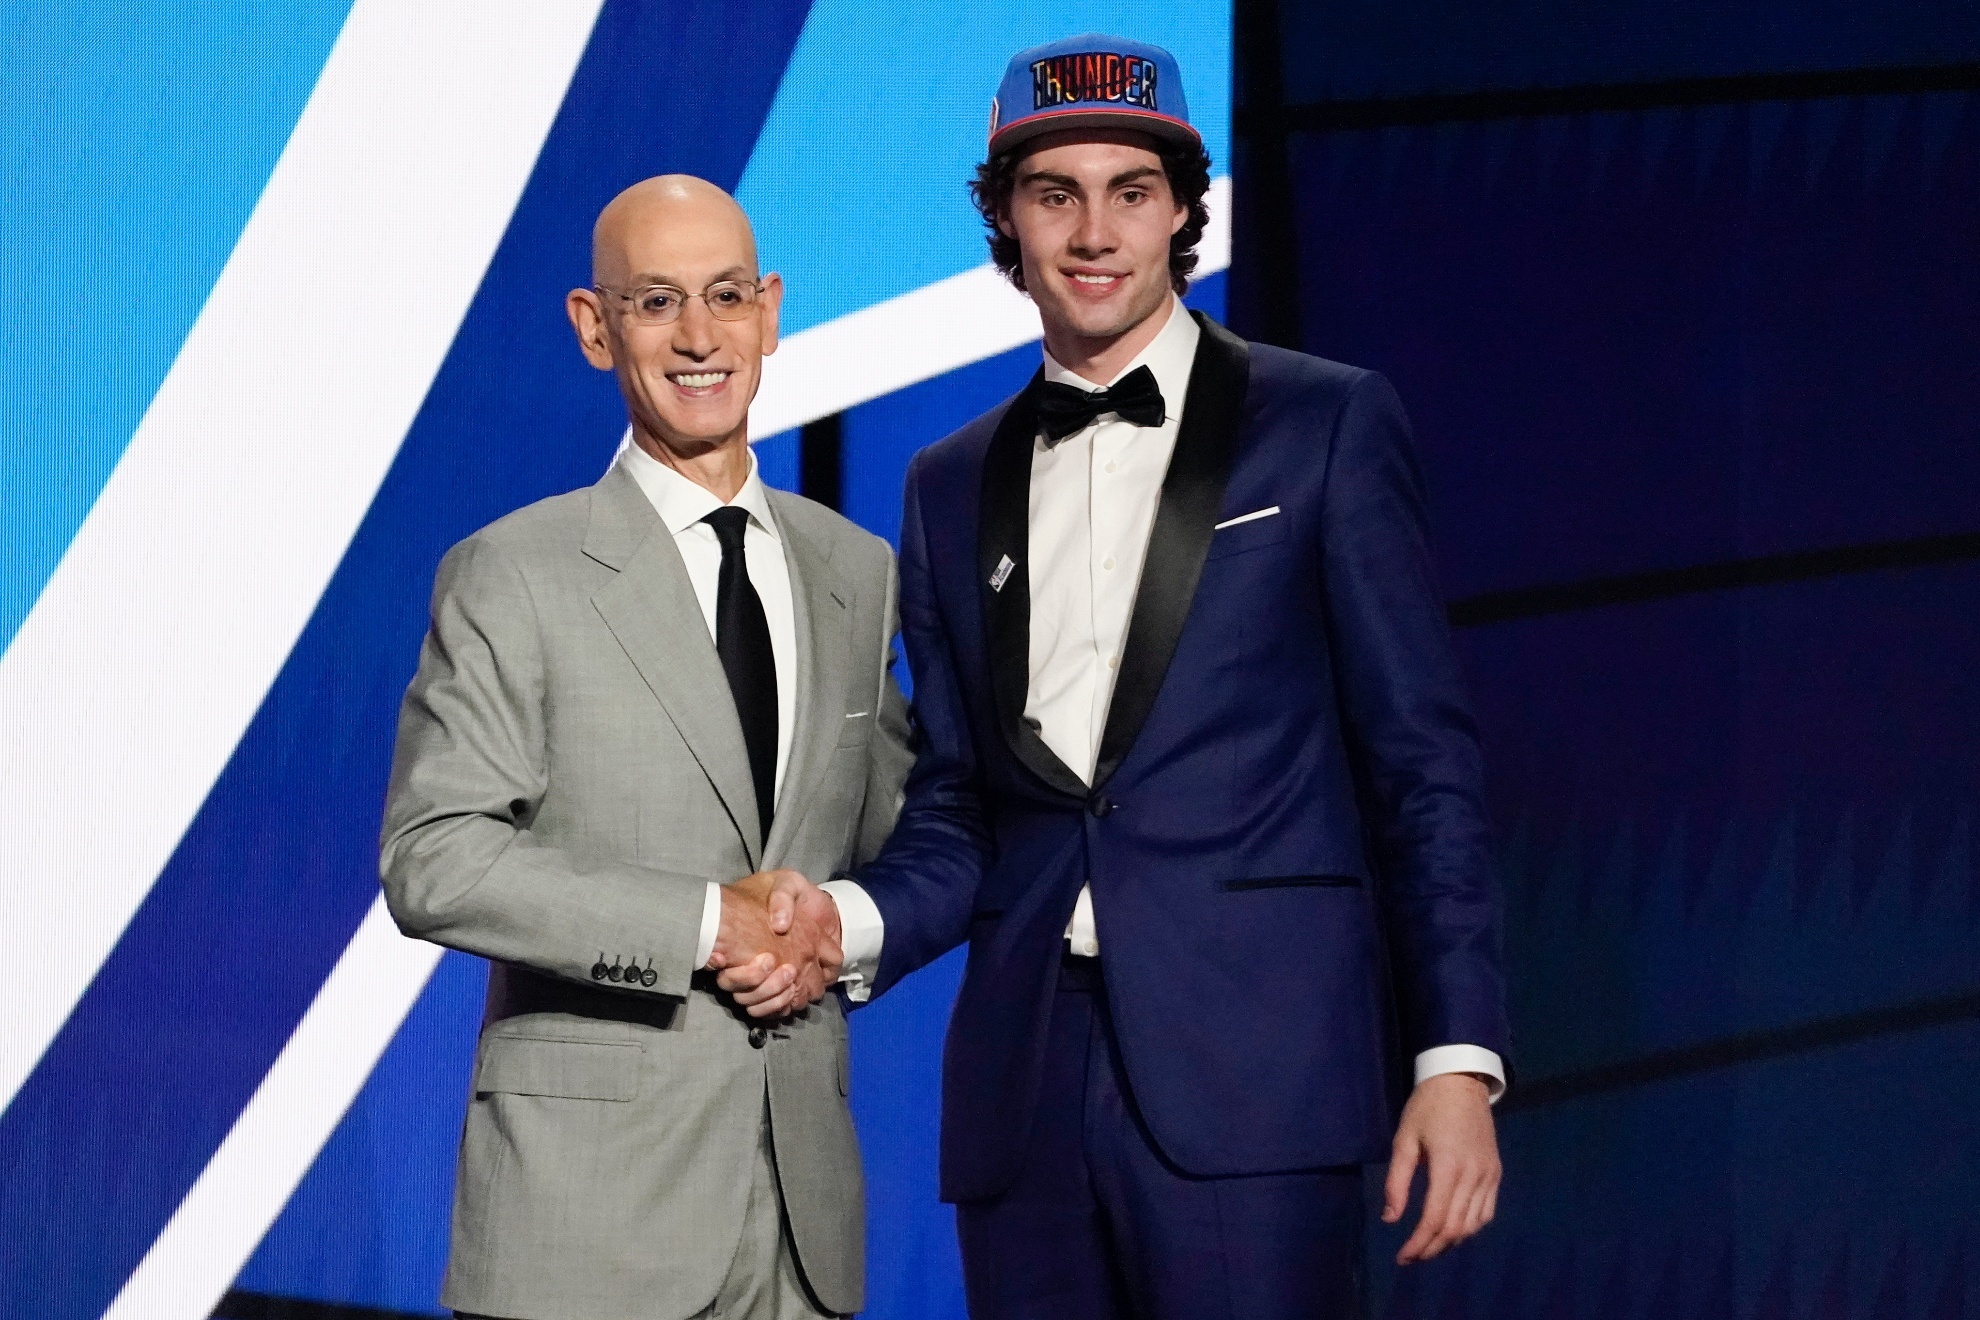 Josh Giddey at the NBA Draft with NBA Commissioner Adam Silver